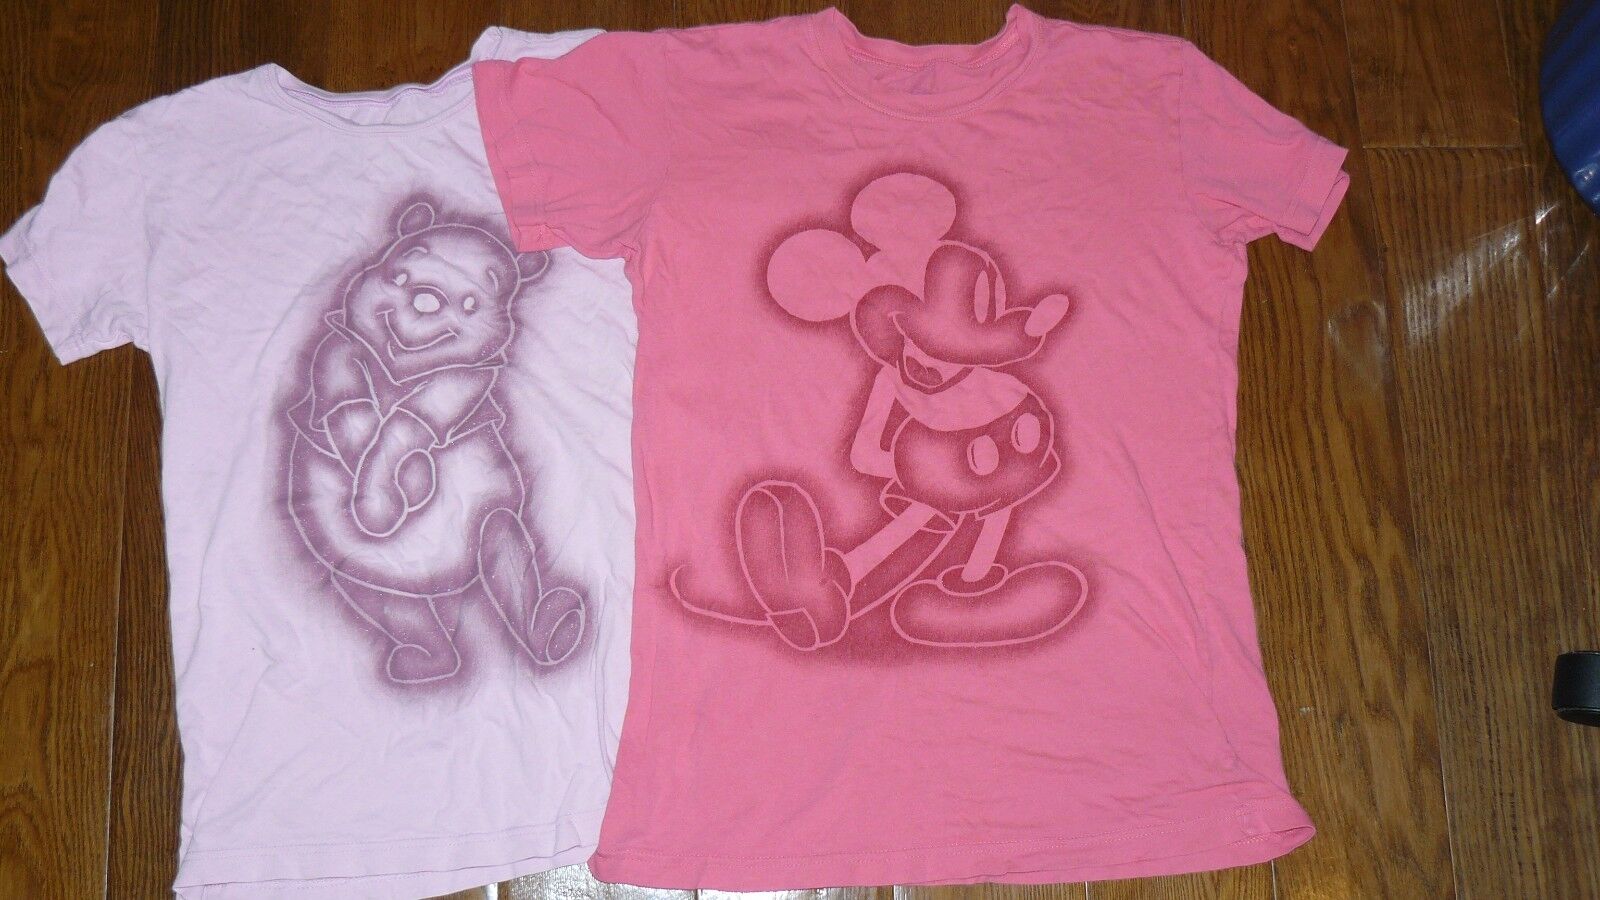 Lot of 2 Disney tshirts ladies size XS Whinnie the Pooh and Mickey Mouse